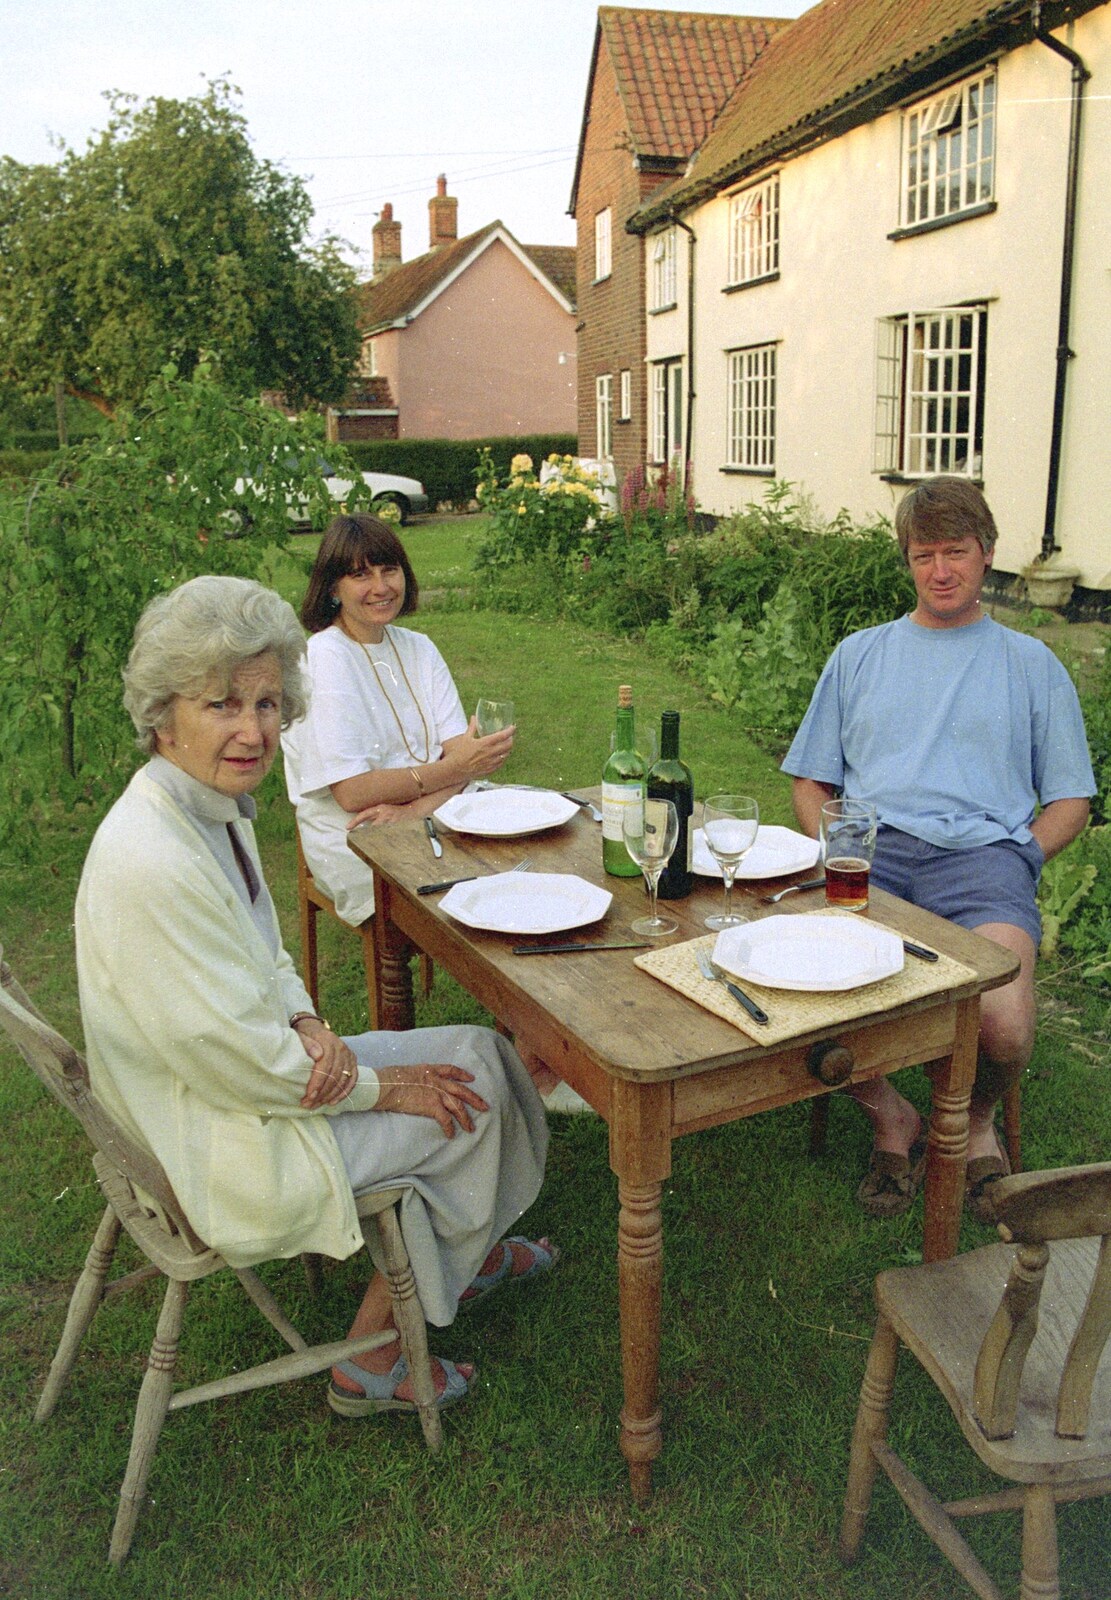 Grandmother, Neil and Caroline Visit, Brome and Orford, Suffolk - 24th July 1995: G, Caroline and Neil prepare for dinner